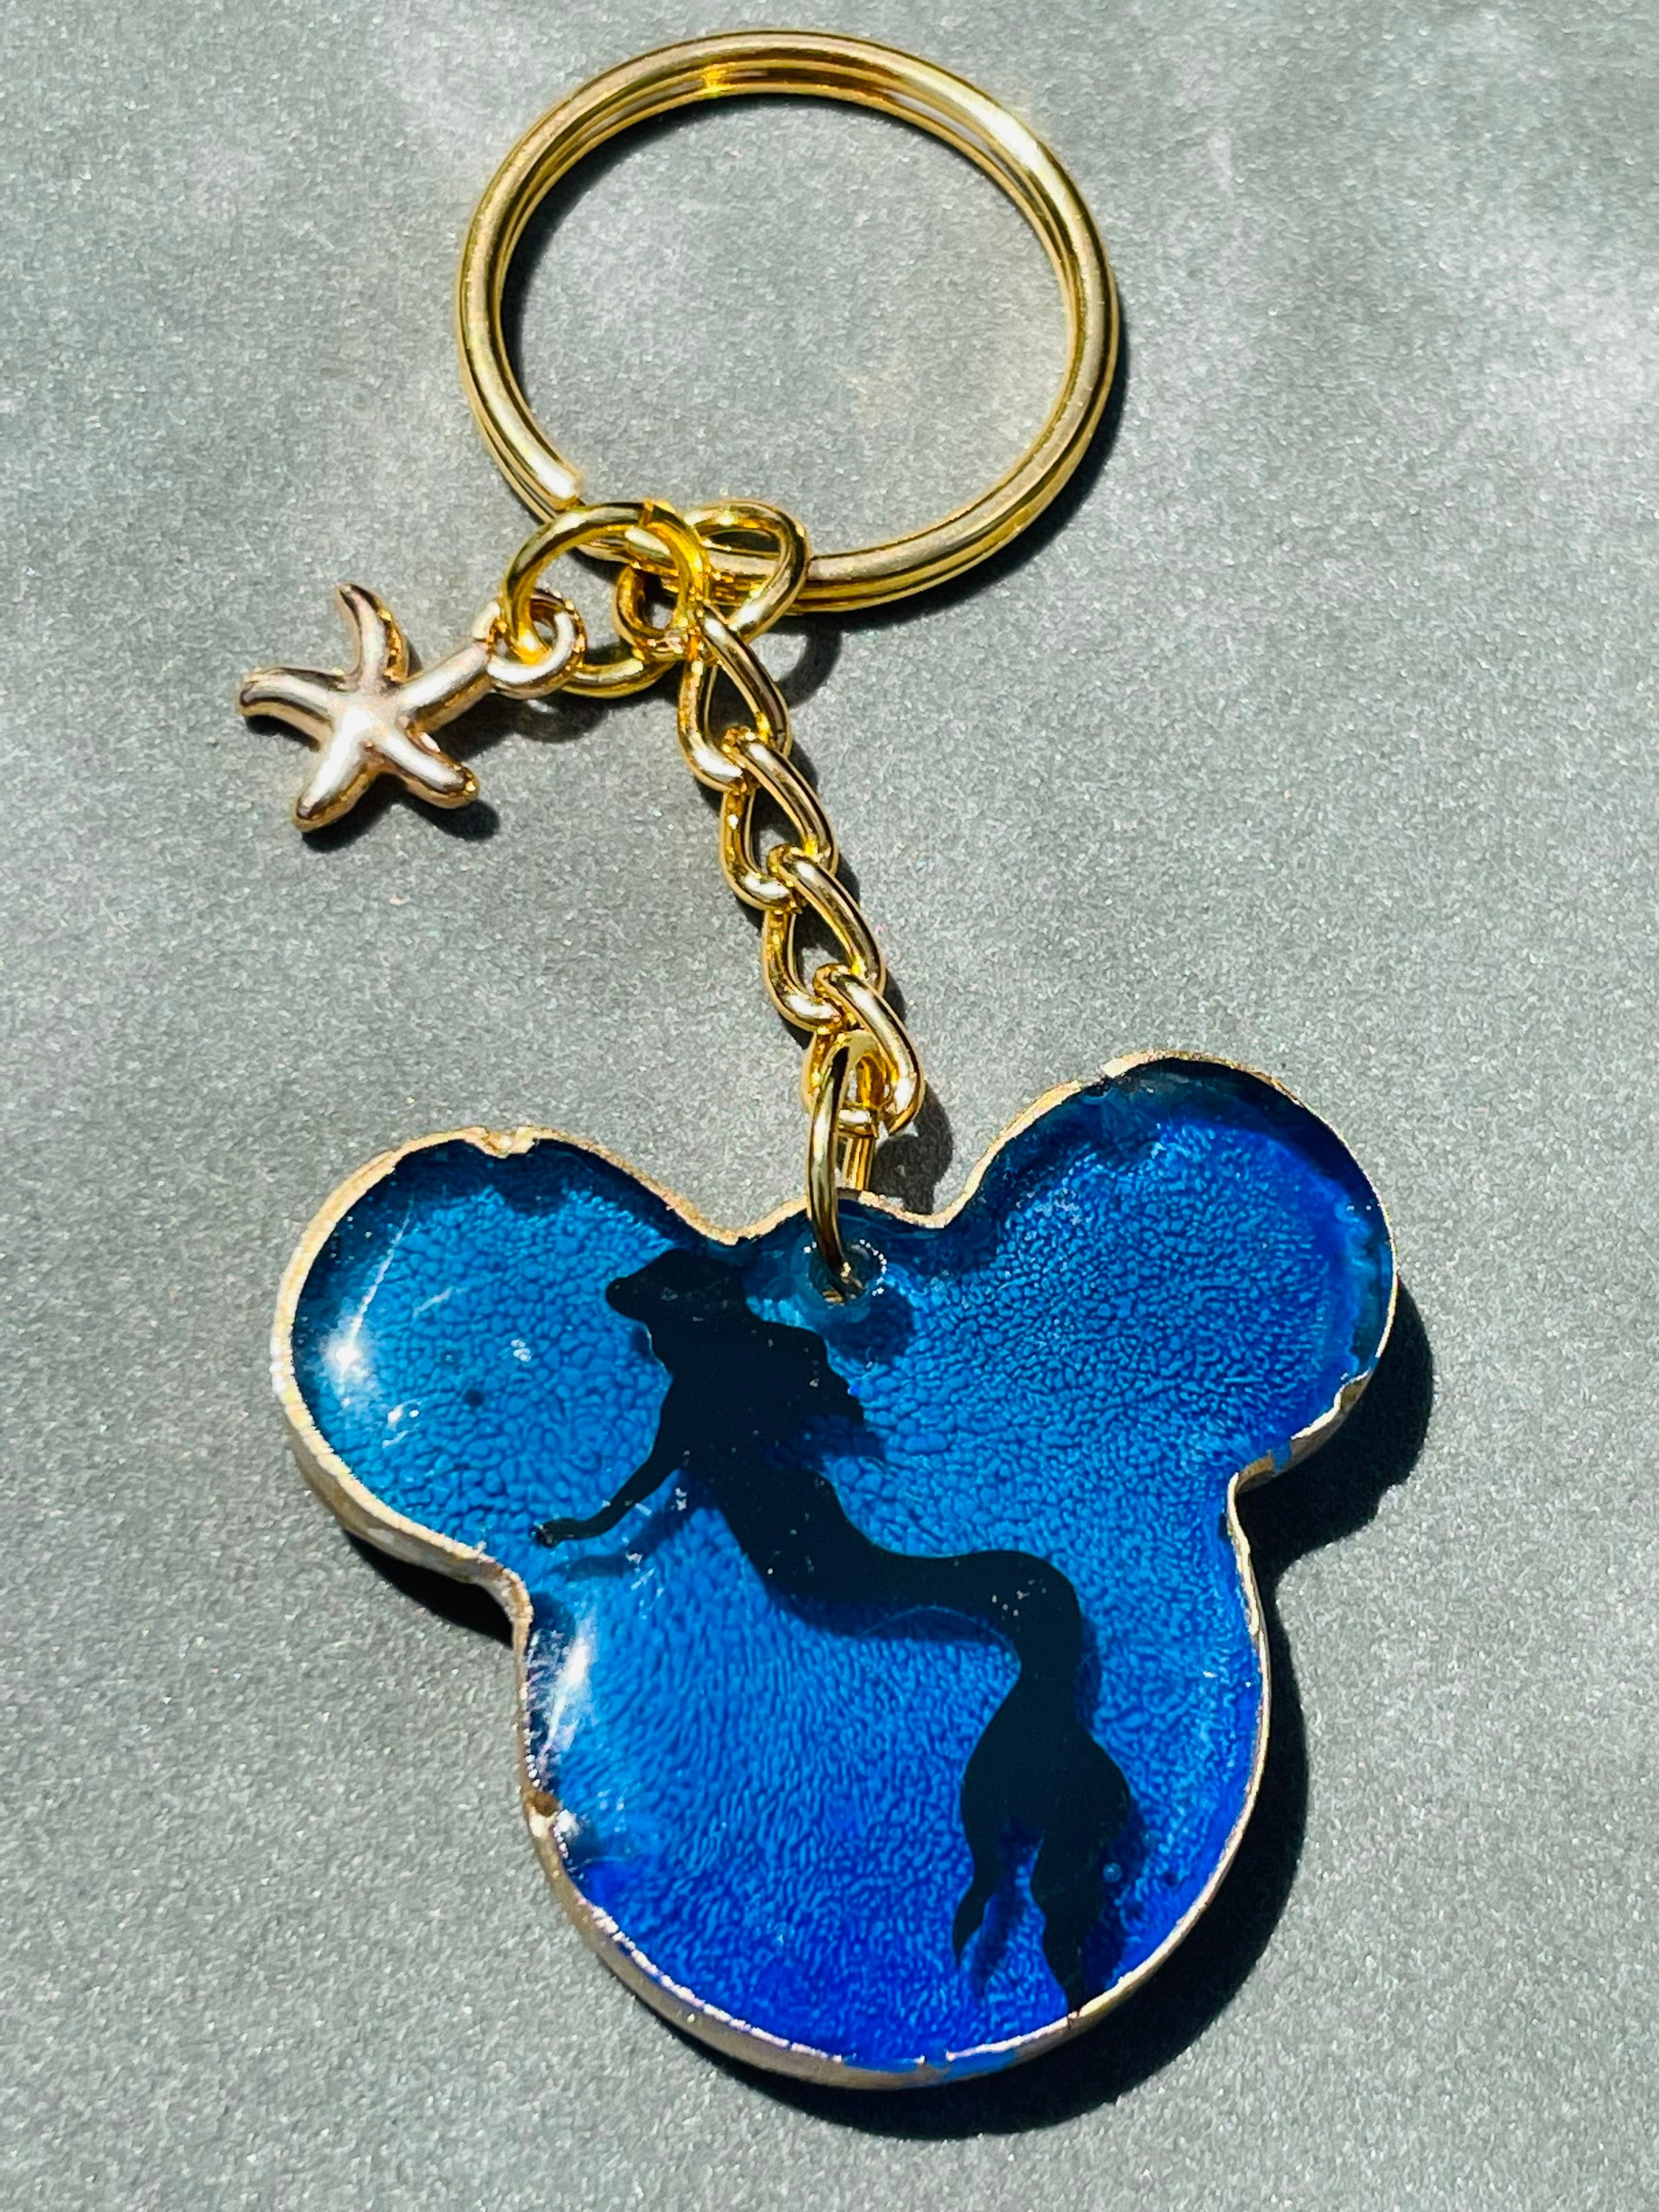 The Little Mermaid inspired Mickey Mouse shaped keychain | Etsy